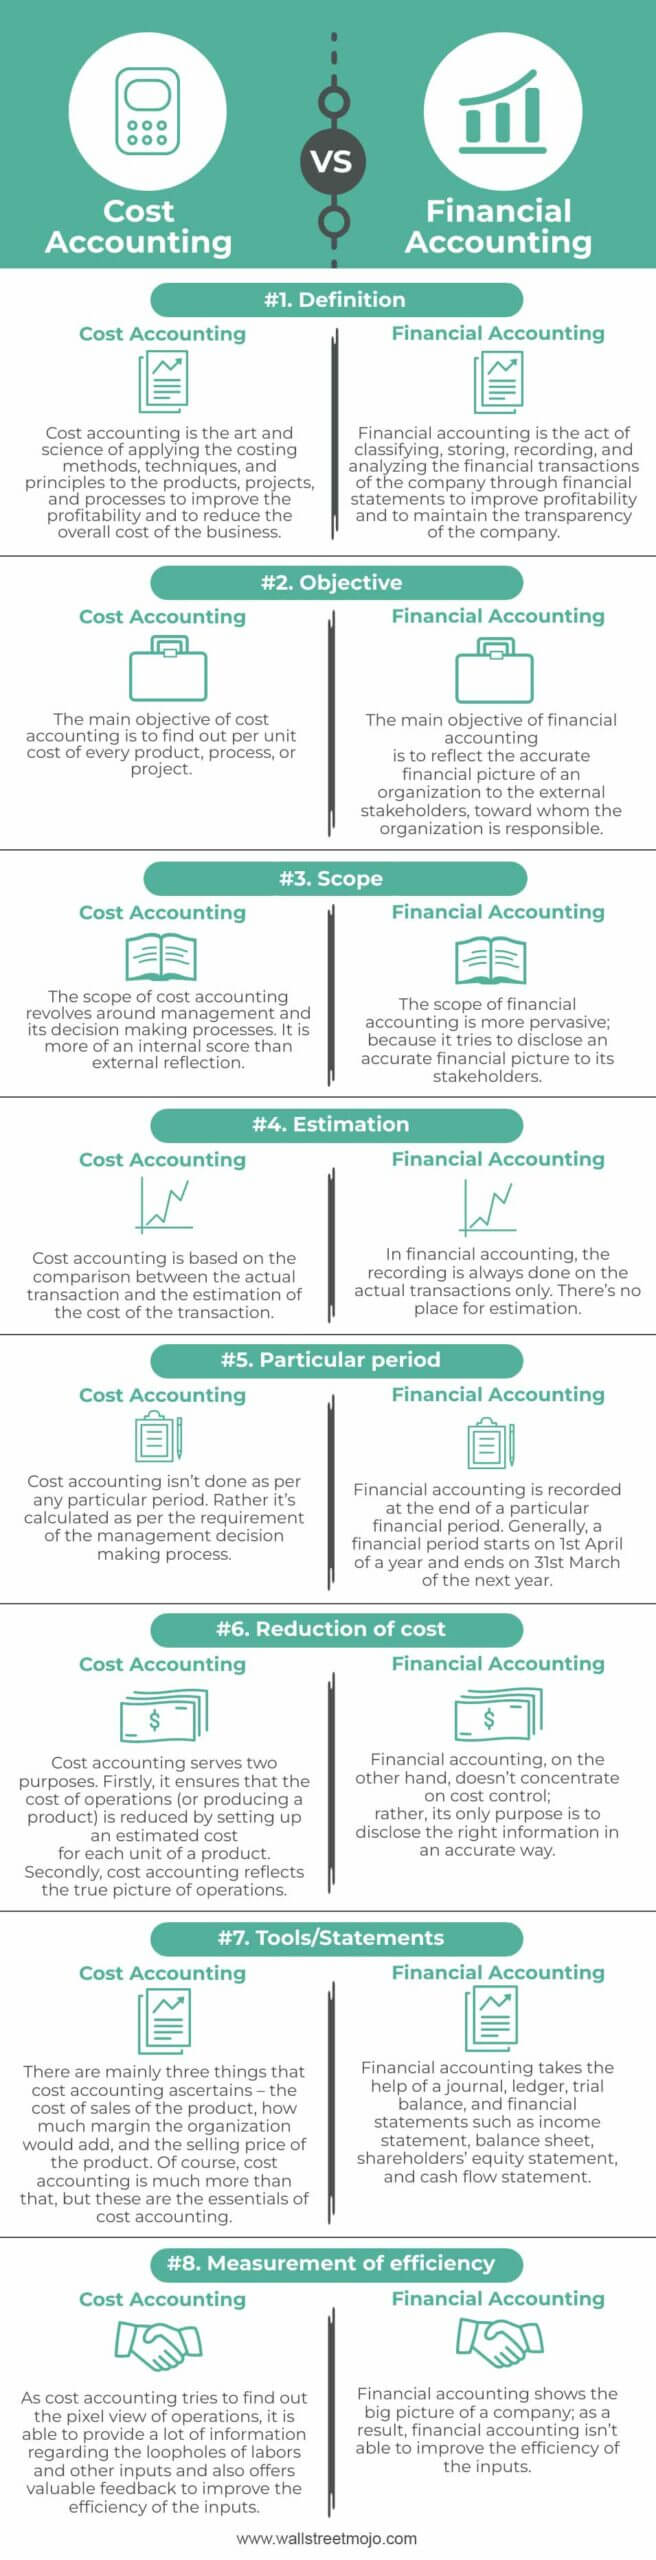 Cost-Accounting-vs-Financial-Accounting-info